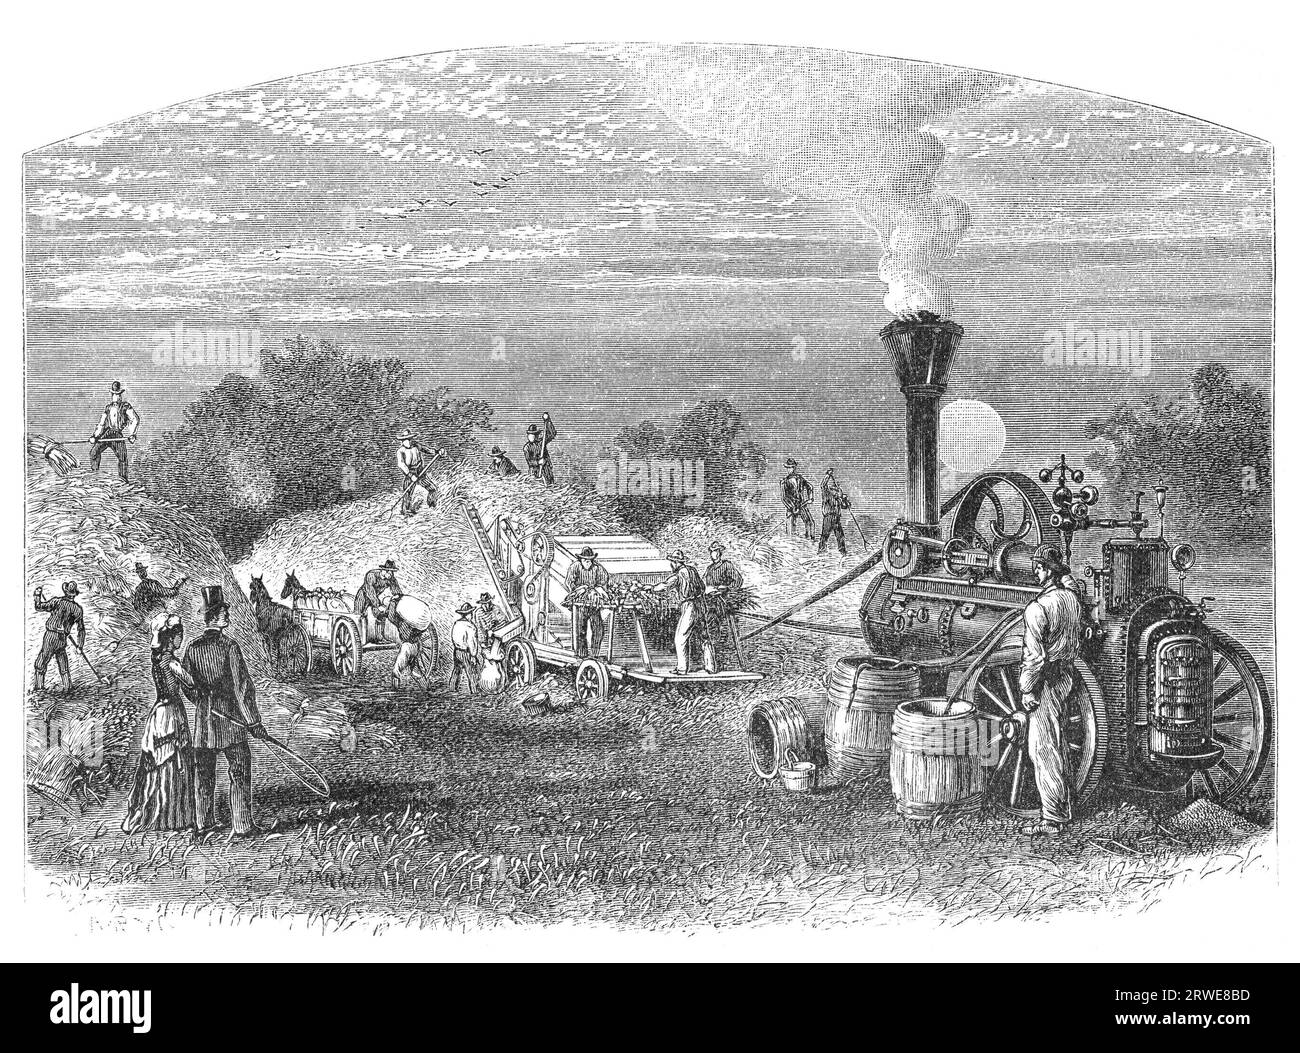 Agriculture in Dakota, USA: Threshing. Image source: Harpers Monthly magazine march 1880 Stock Photo